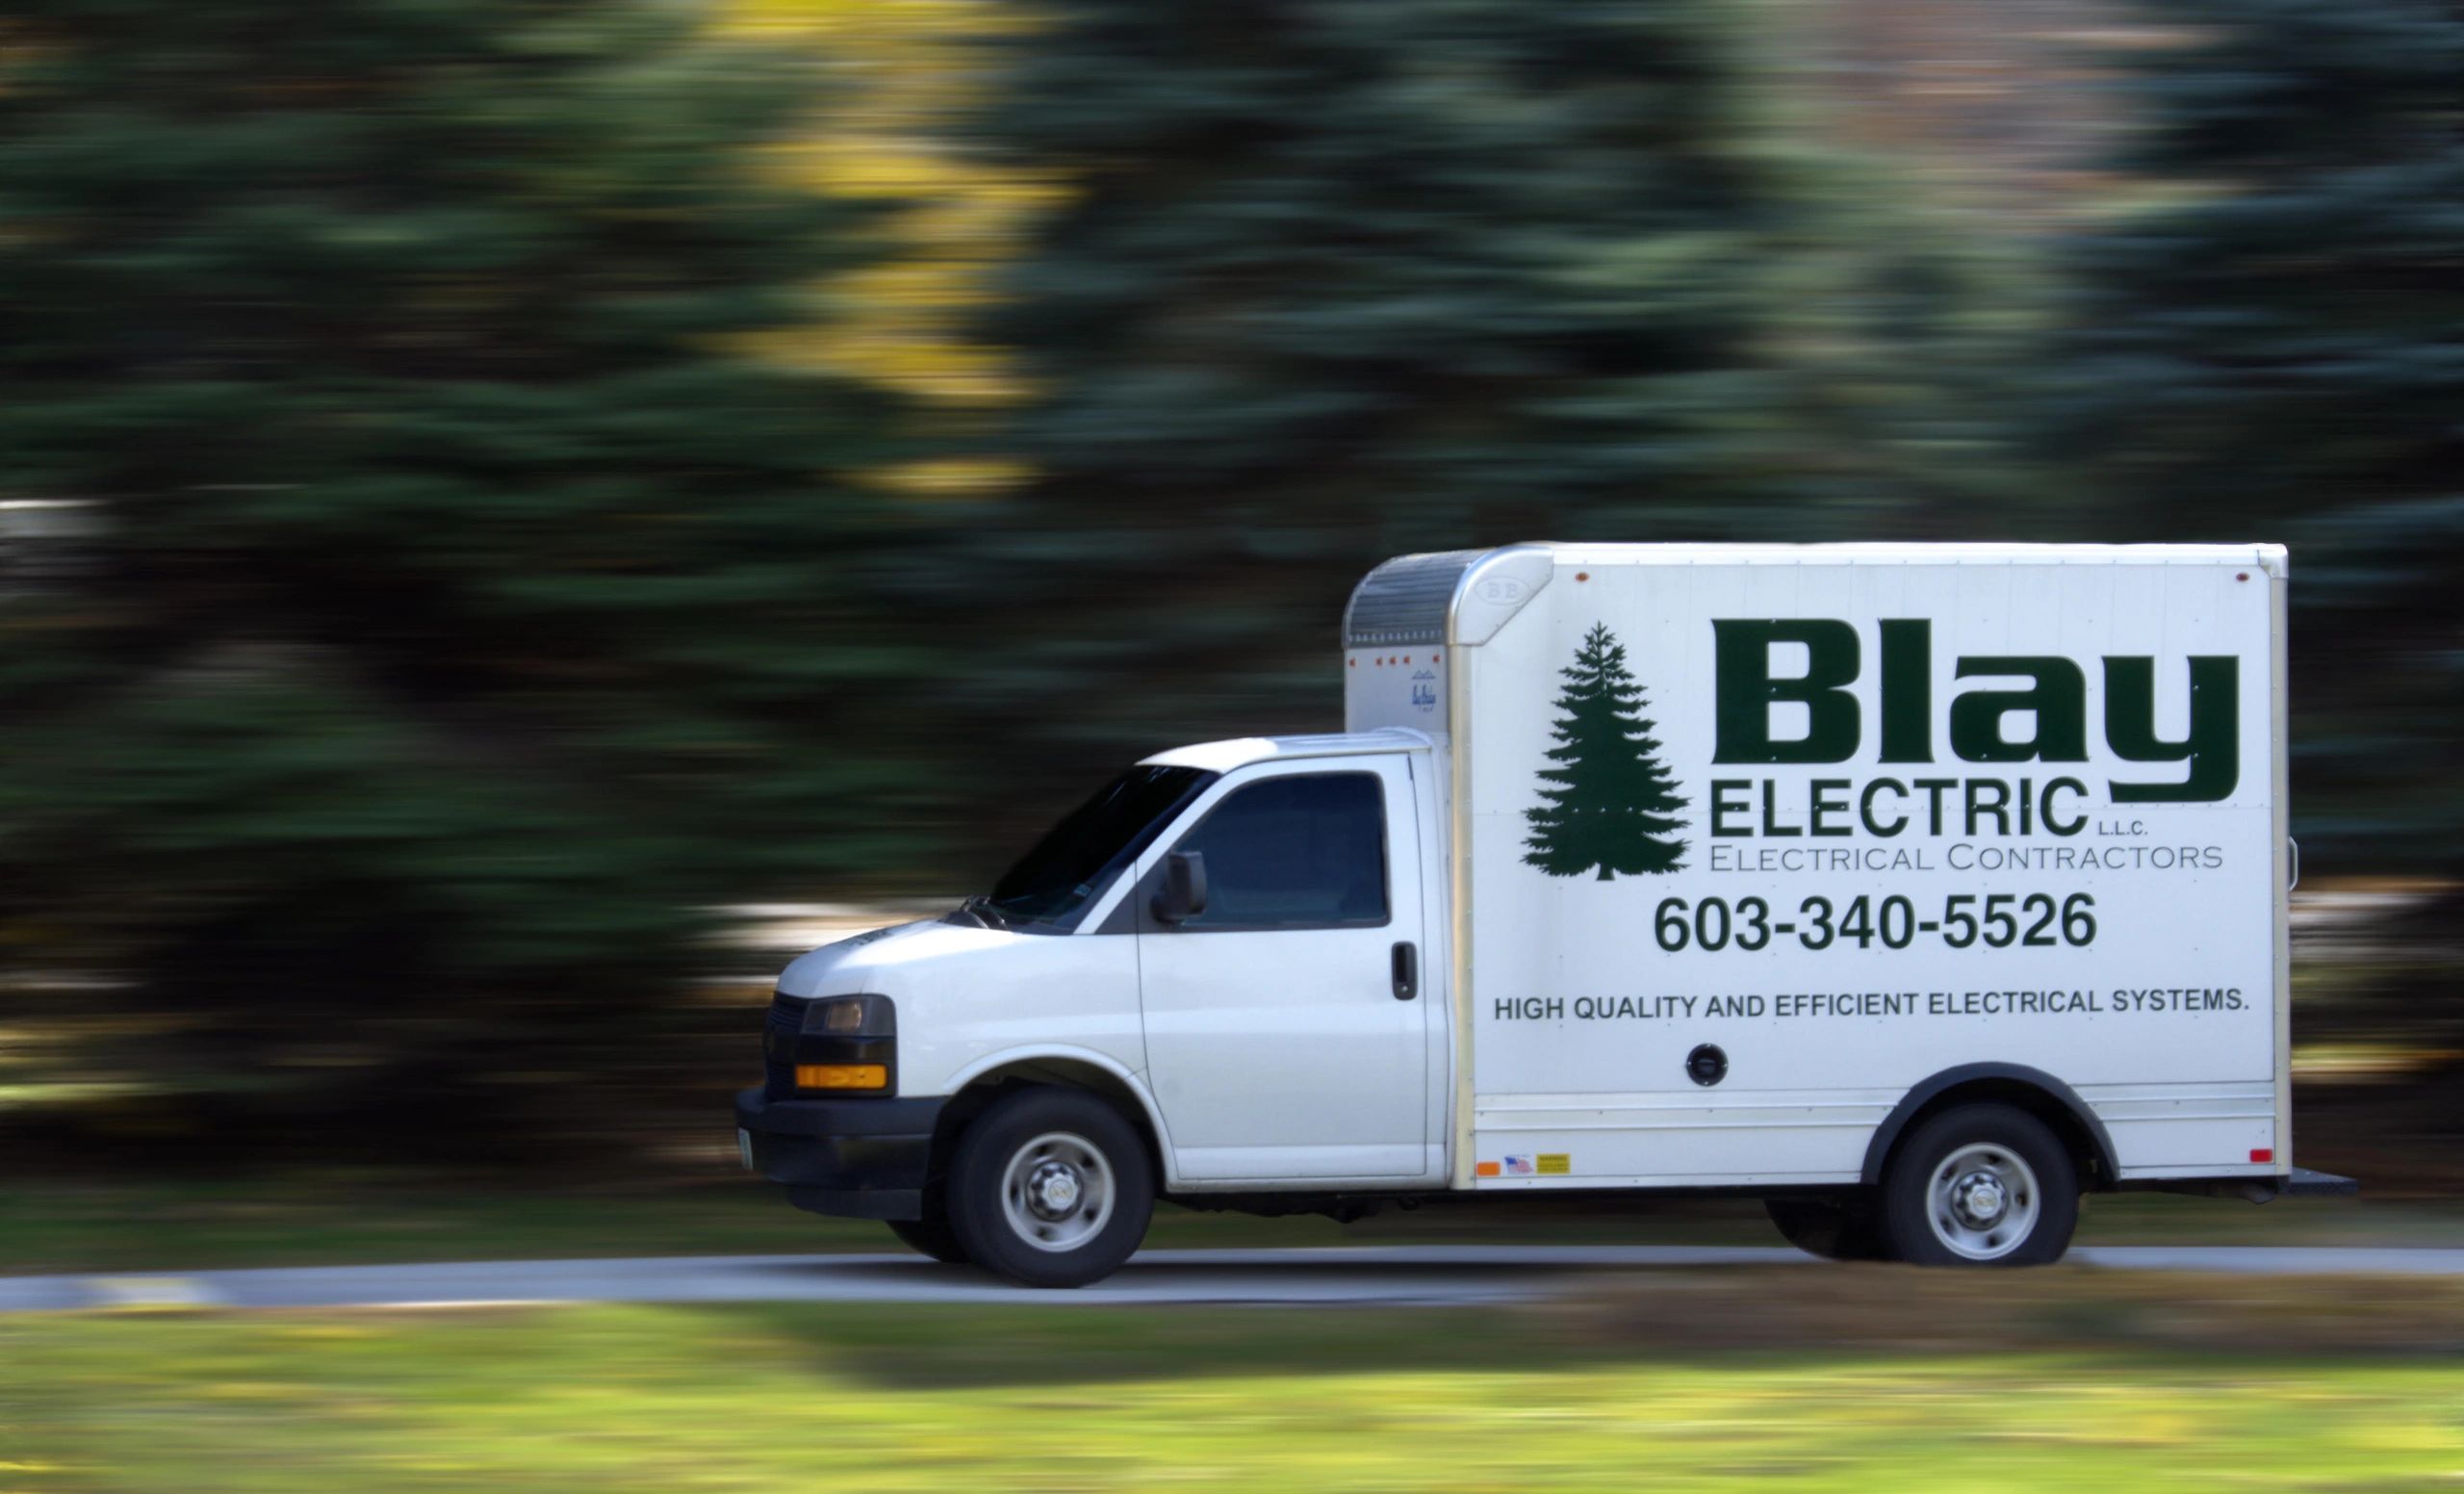 Blay Electric, Electrical Contractors service truck.